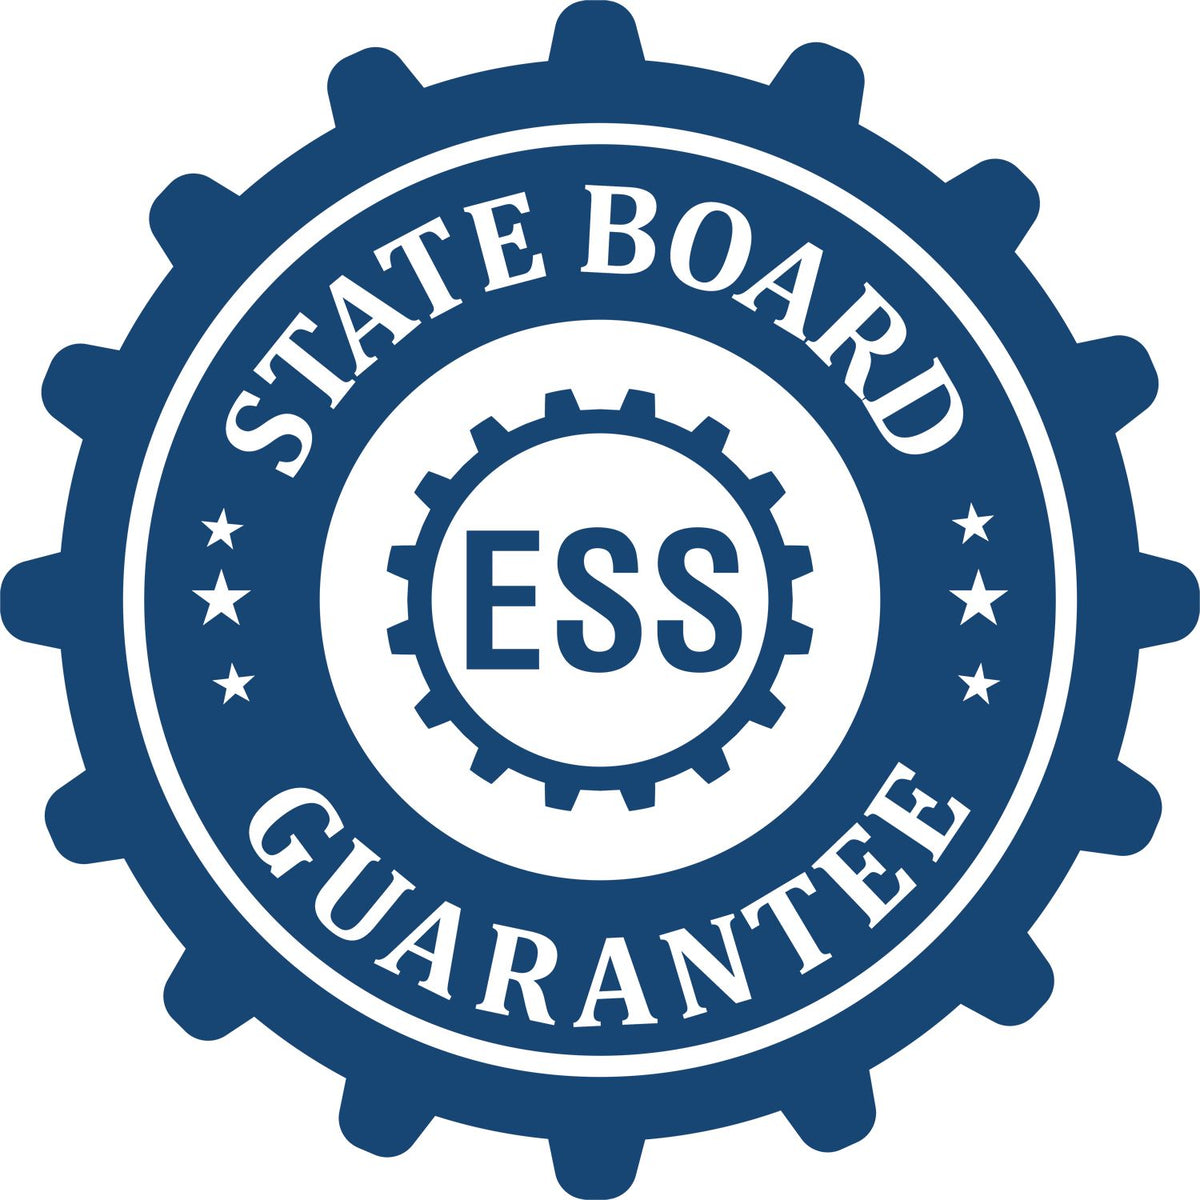 An emblem in a gear shape illustrating a state board guarantee for the State of Pennsylvania Extended Long Reach Engineer Seal product.